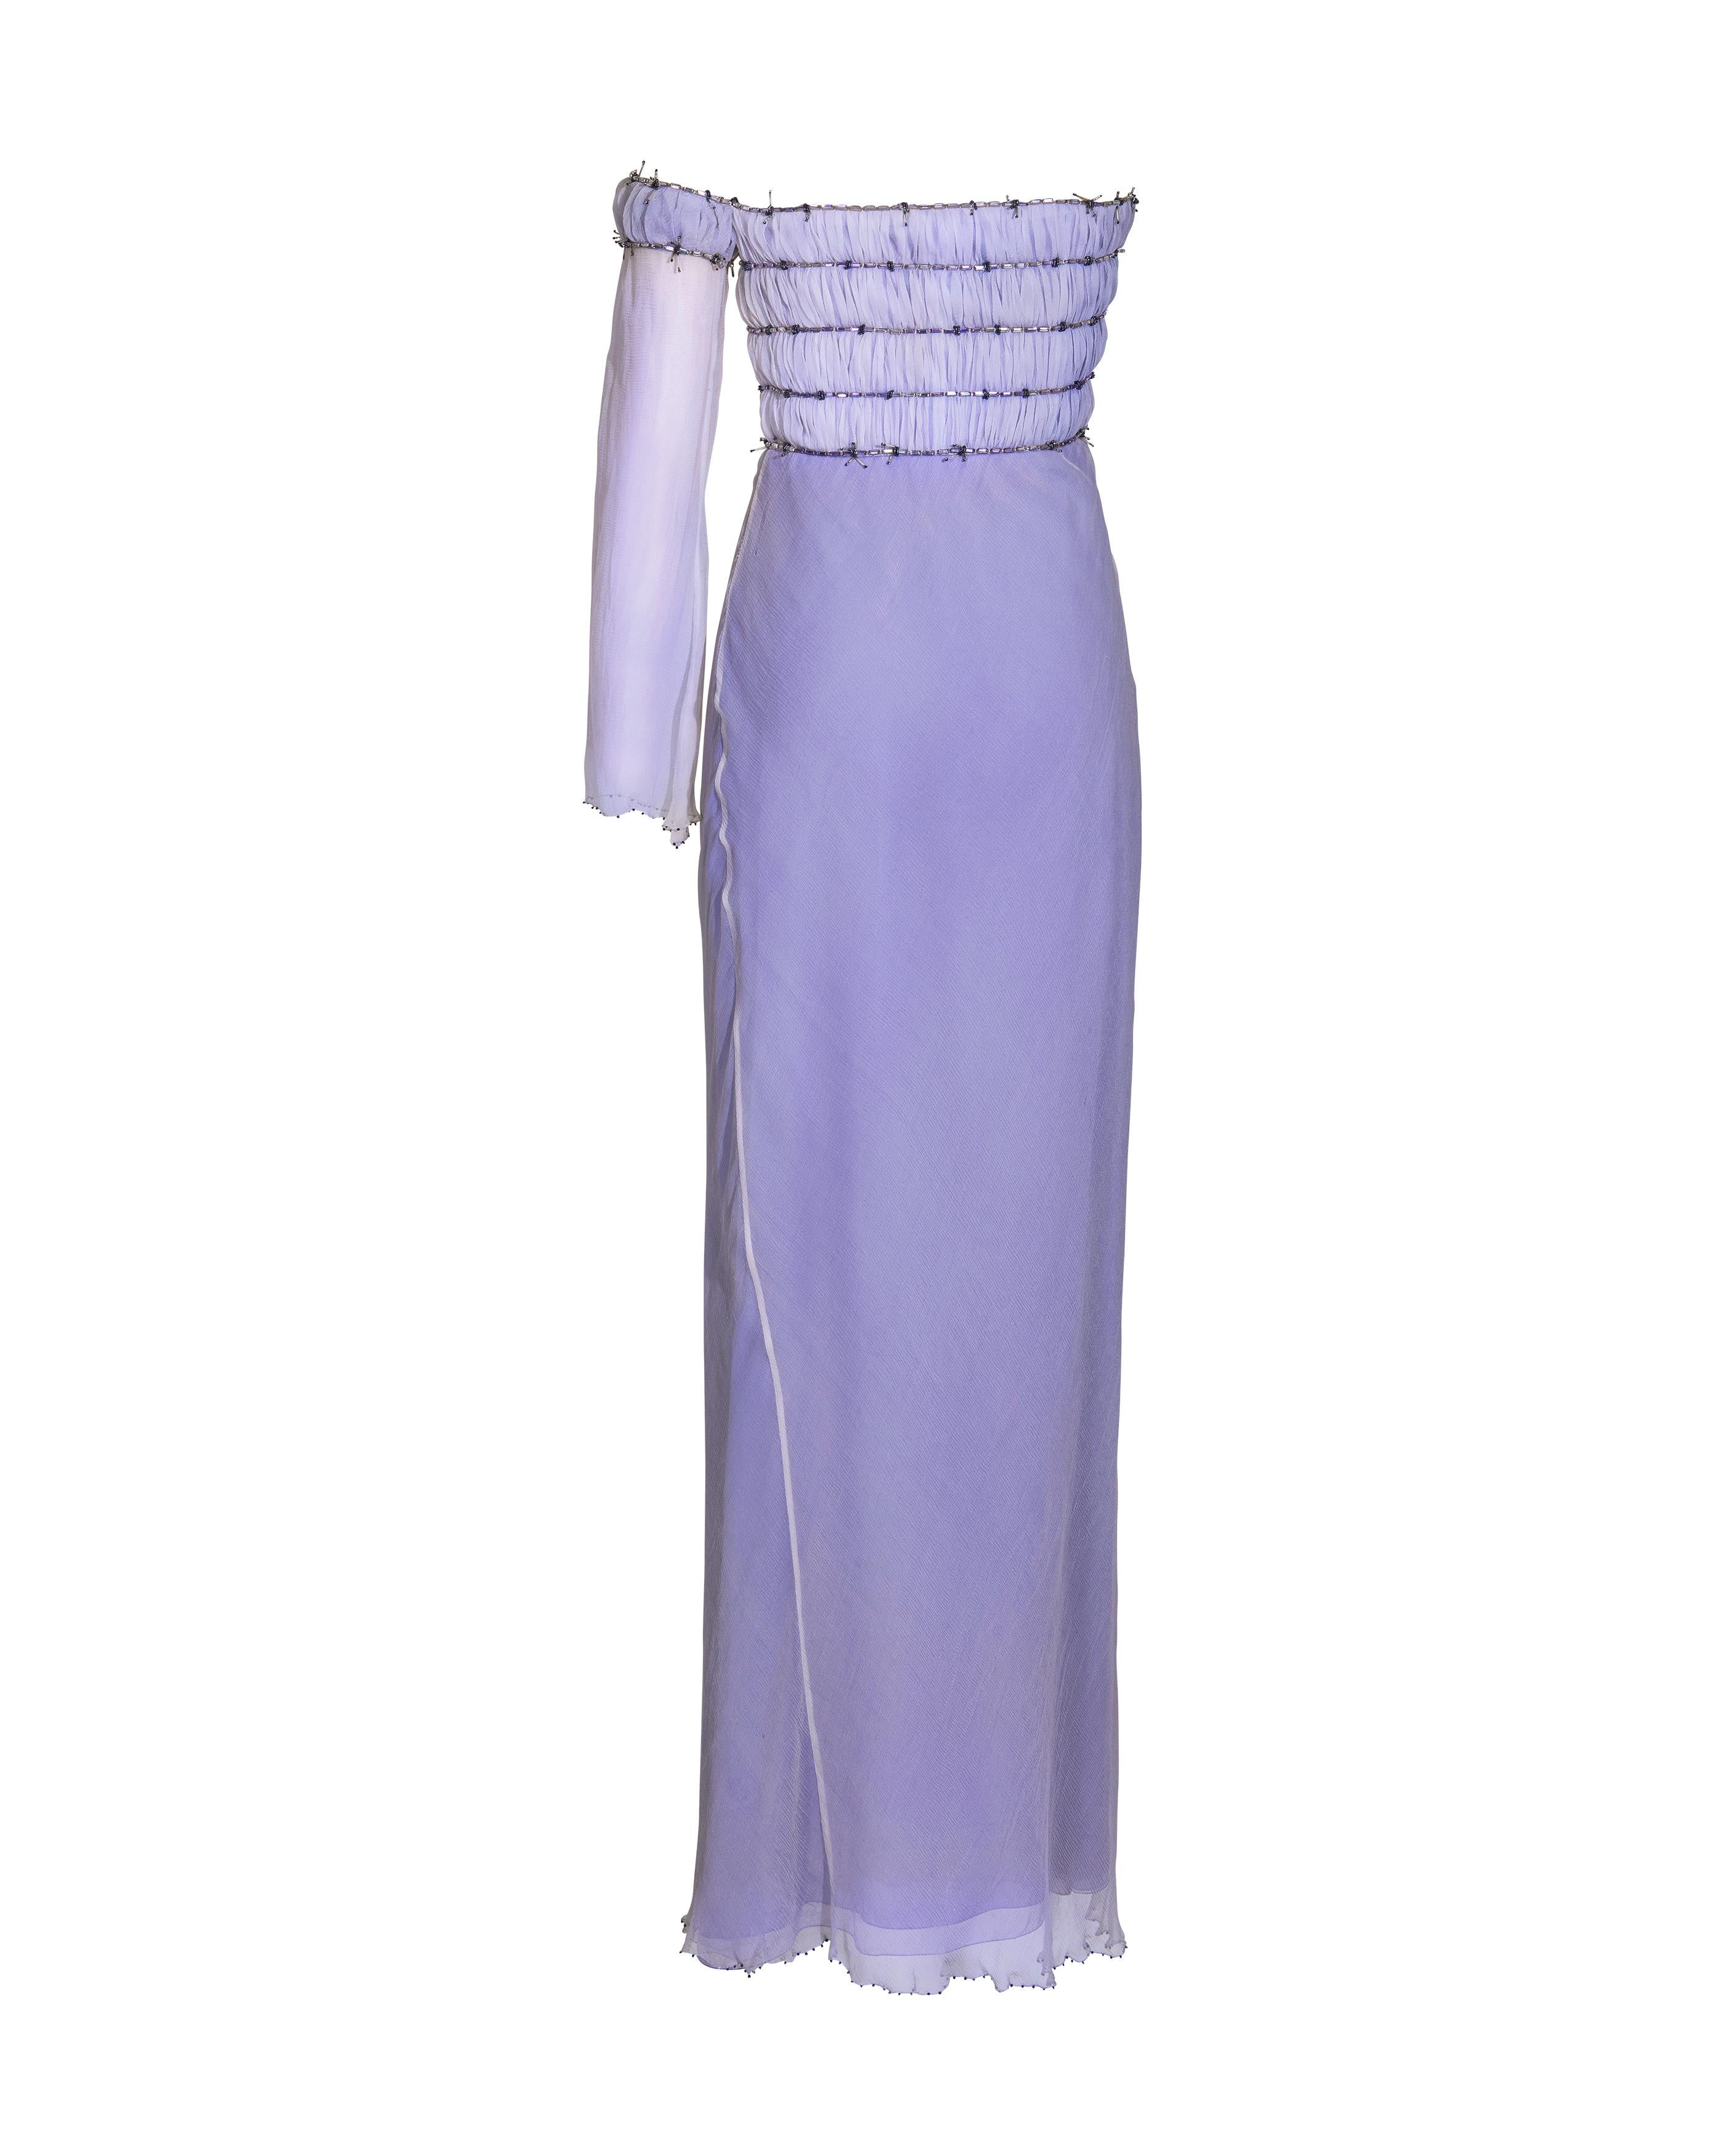 A/W 1998 Gianni Versace Purple Strapless One-Shoulder 'Barbed Wire' Gown 1